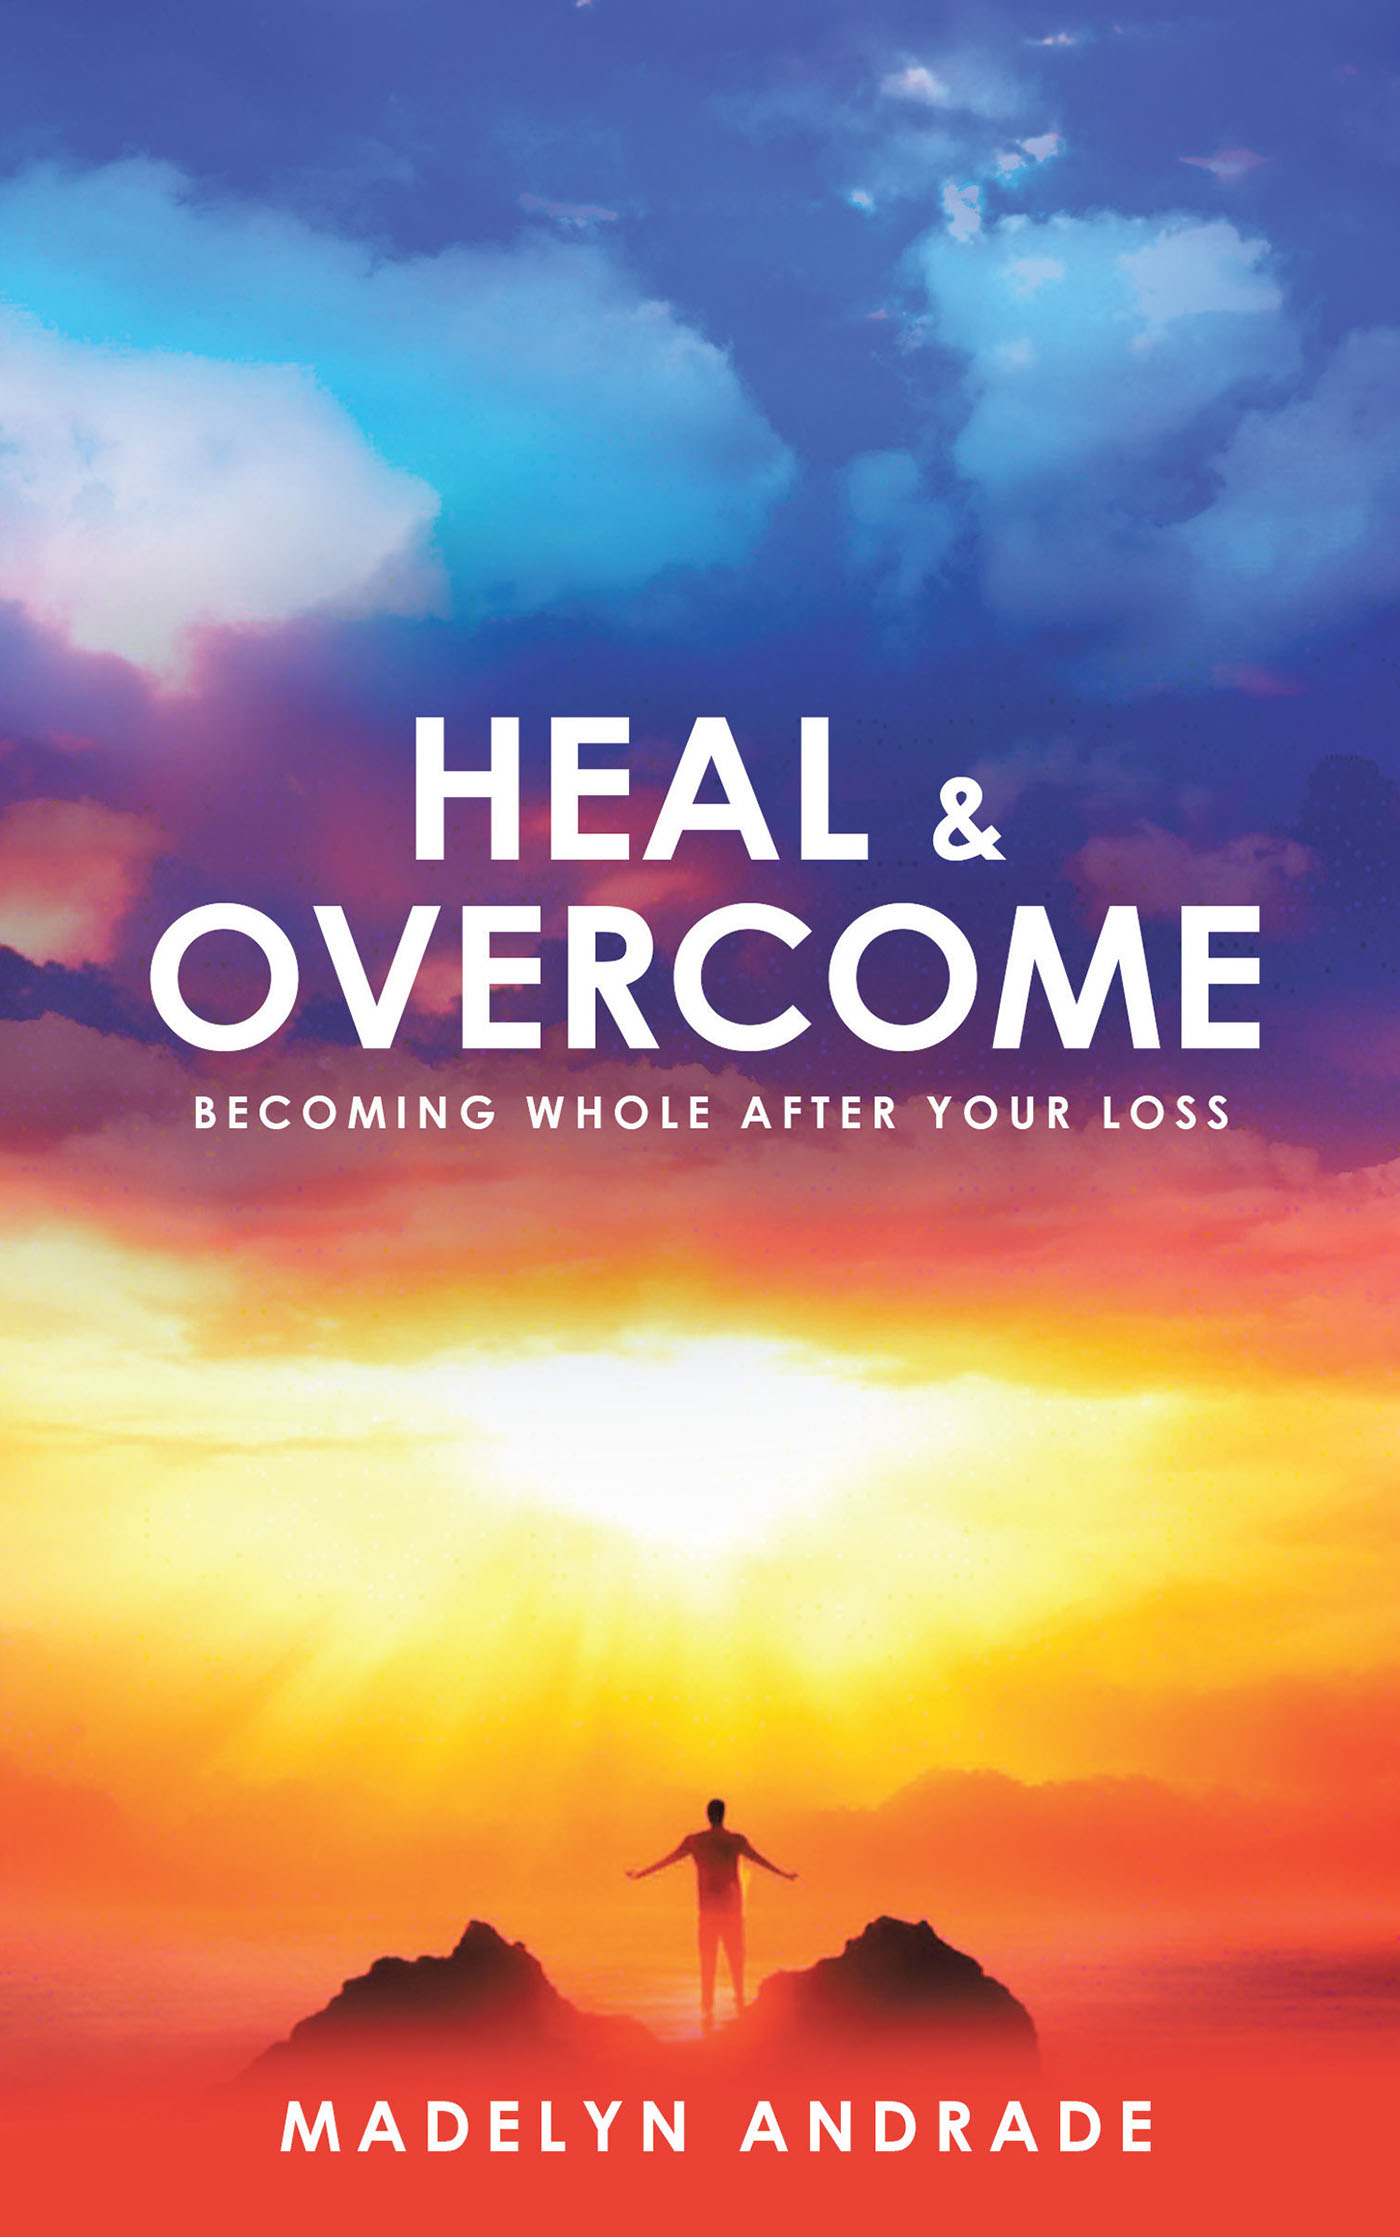 Madelyn Andrade’s Newly Released "Heal and Overcome: Becoming Whole After Your Loss" is an Uplifting Guide to Recovery